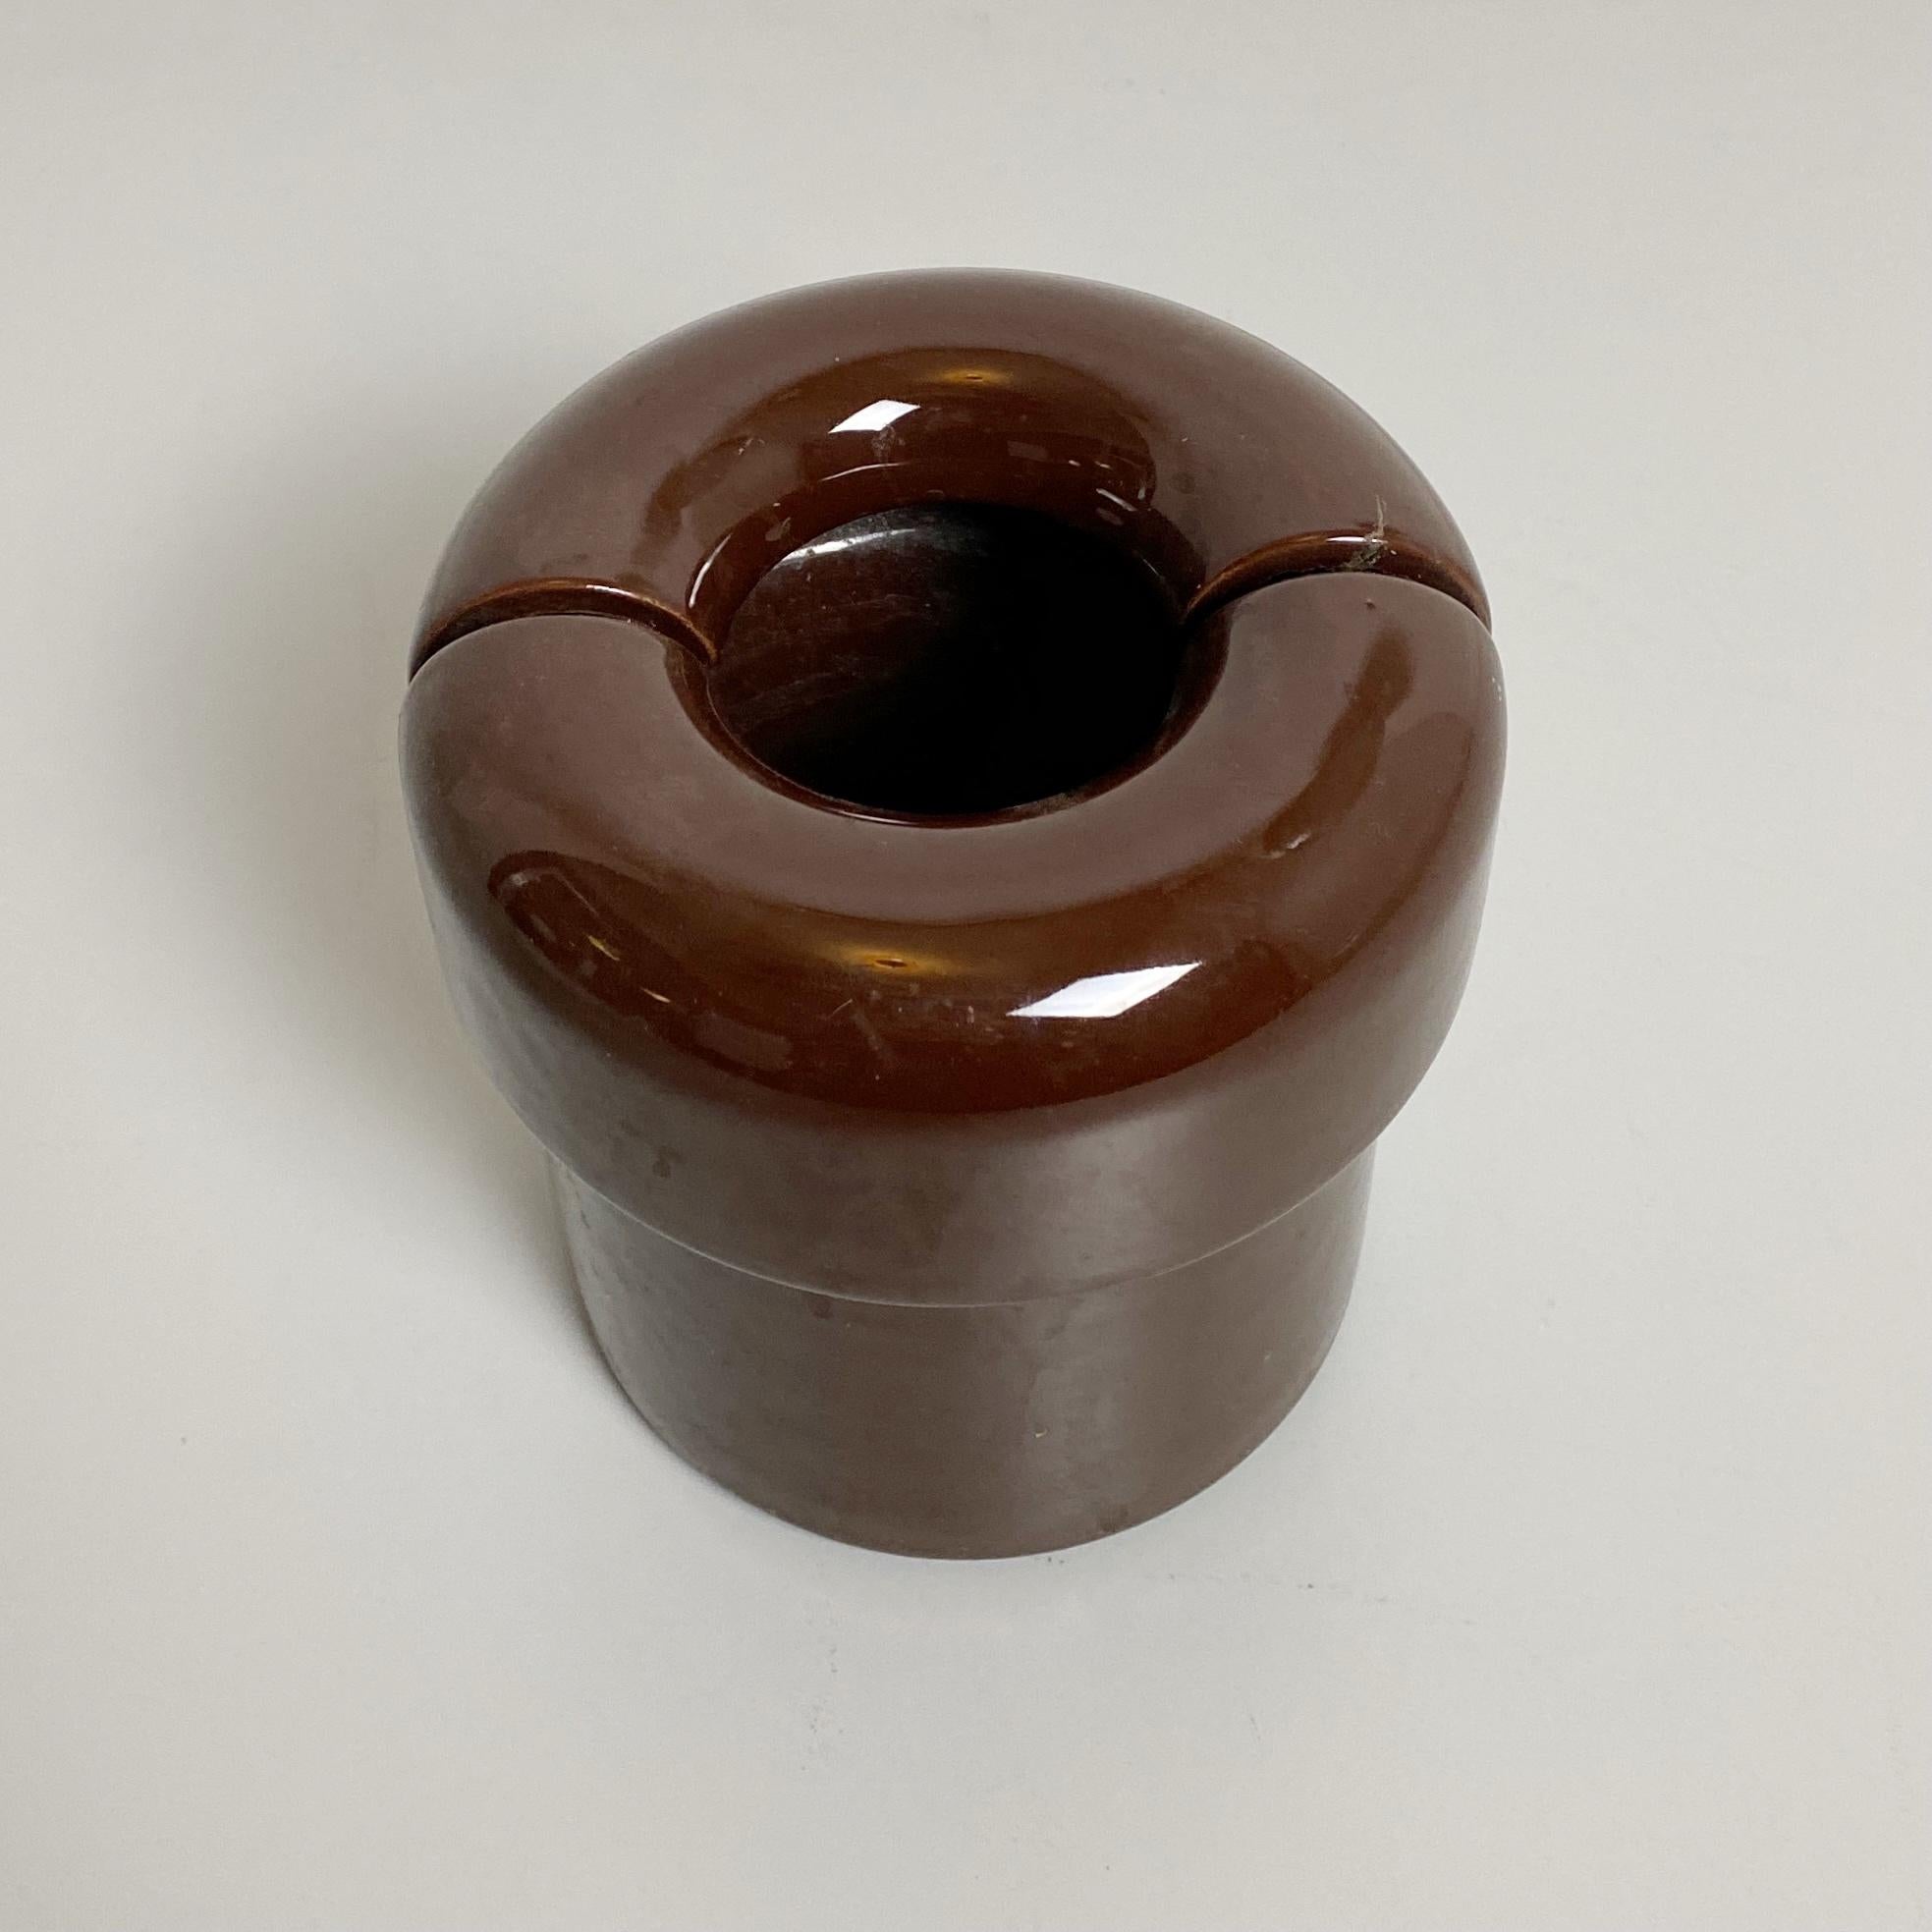 Italian Mid-Century Modern Brown Ceramic Vase by Lineareorm, 1960s For Sale 1